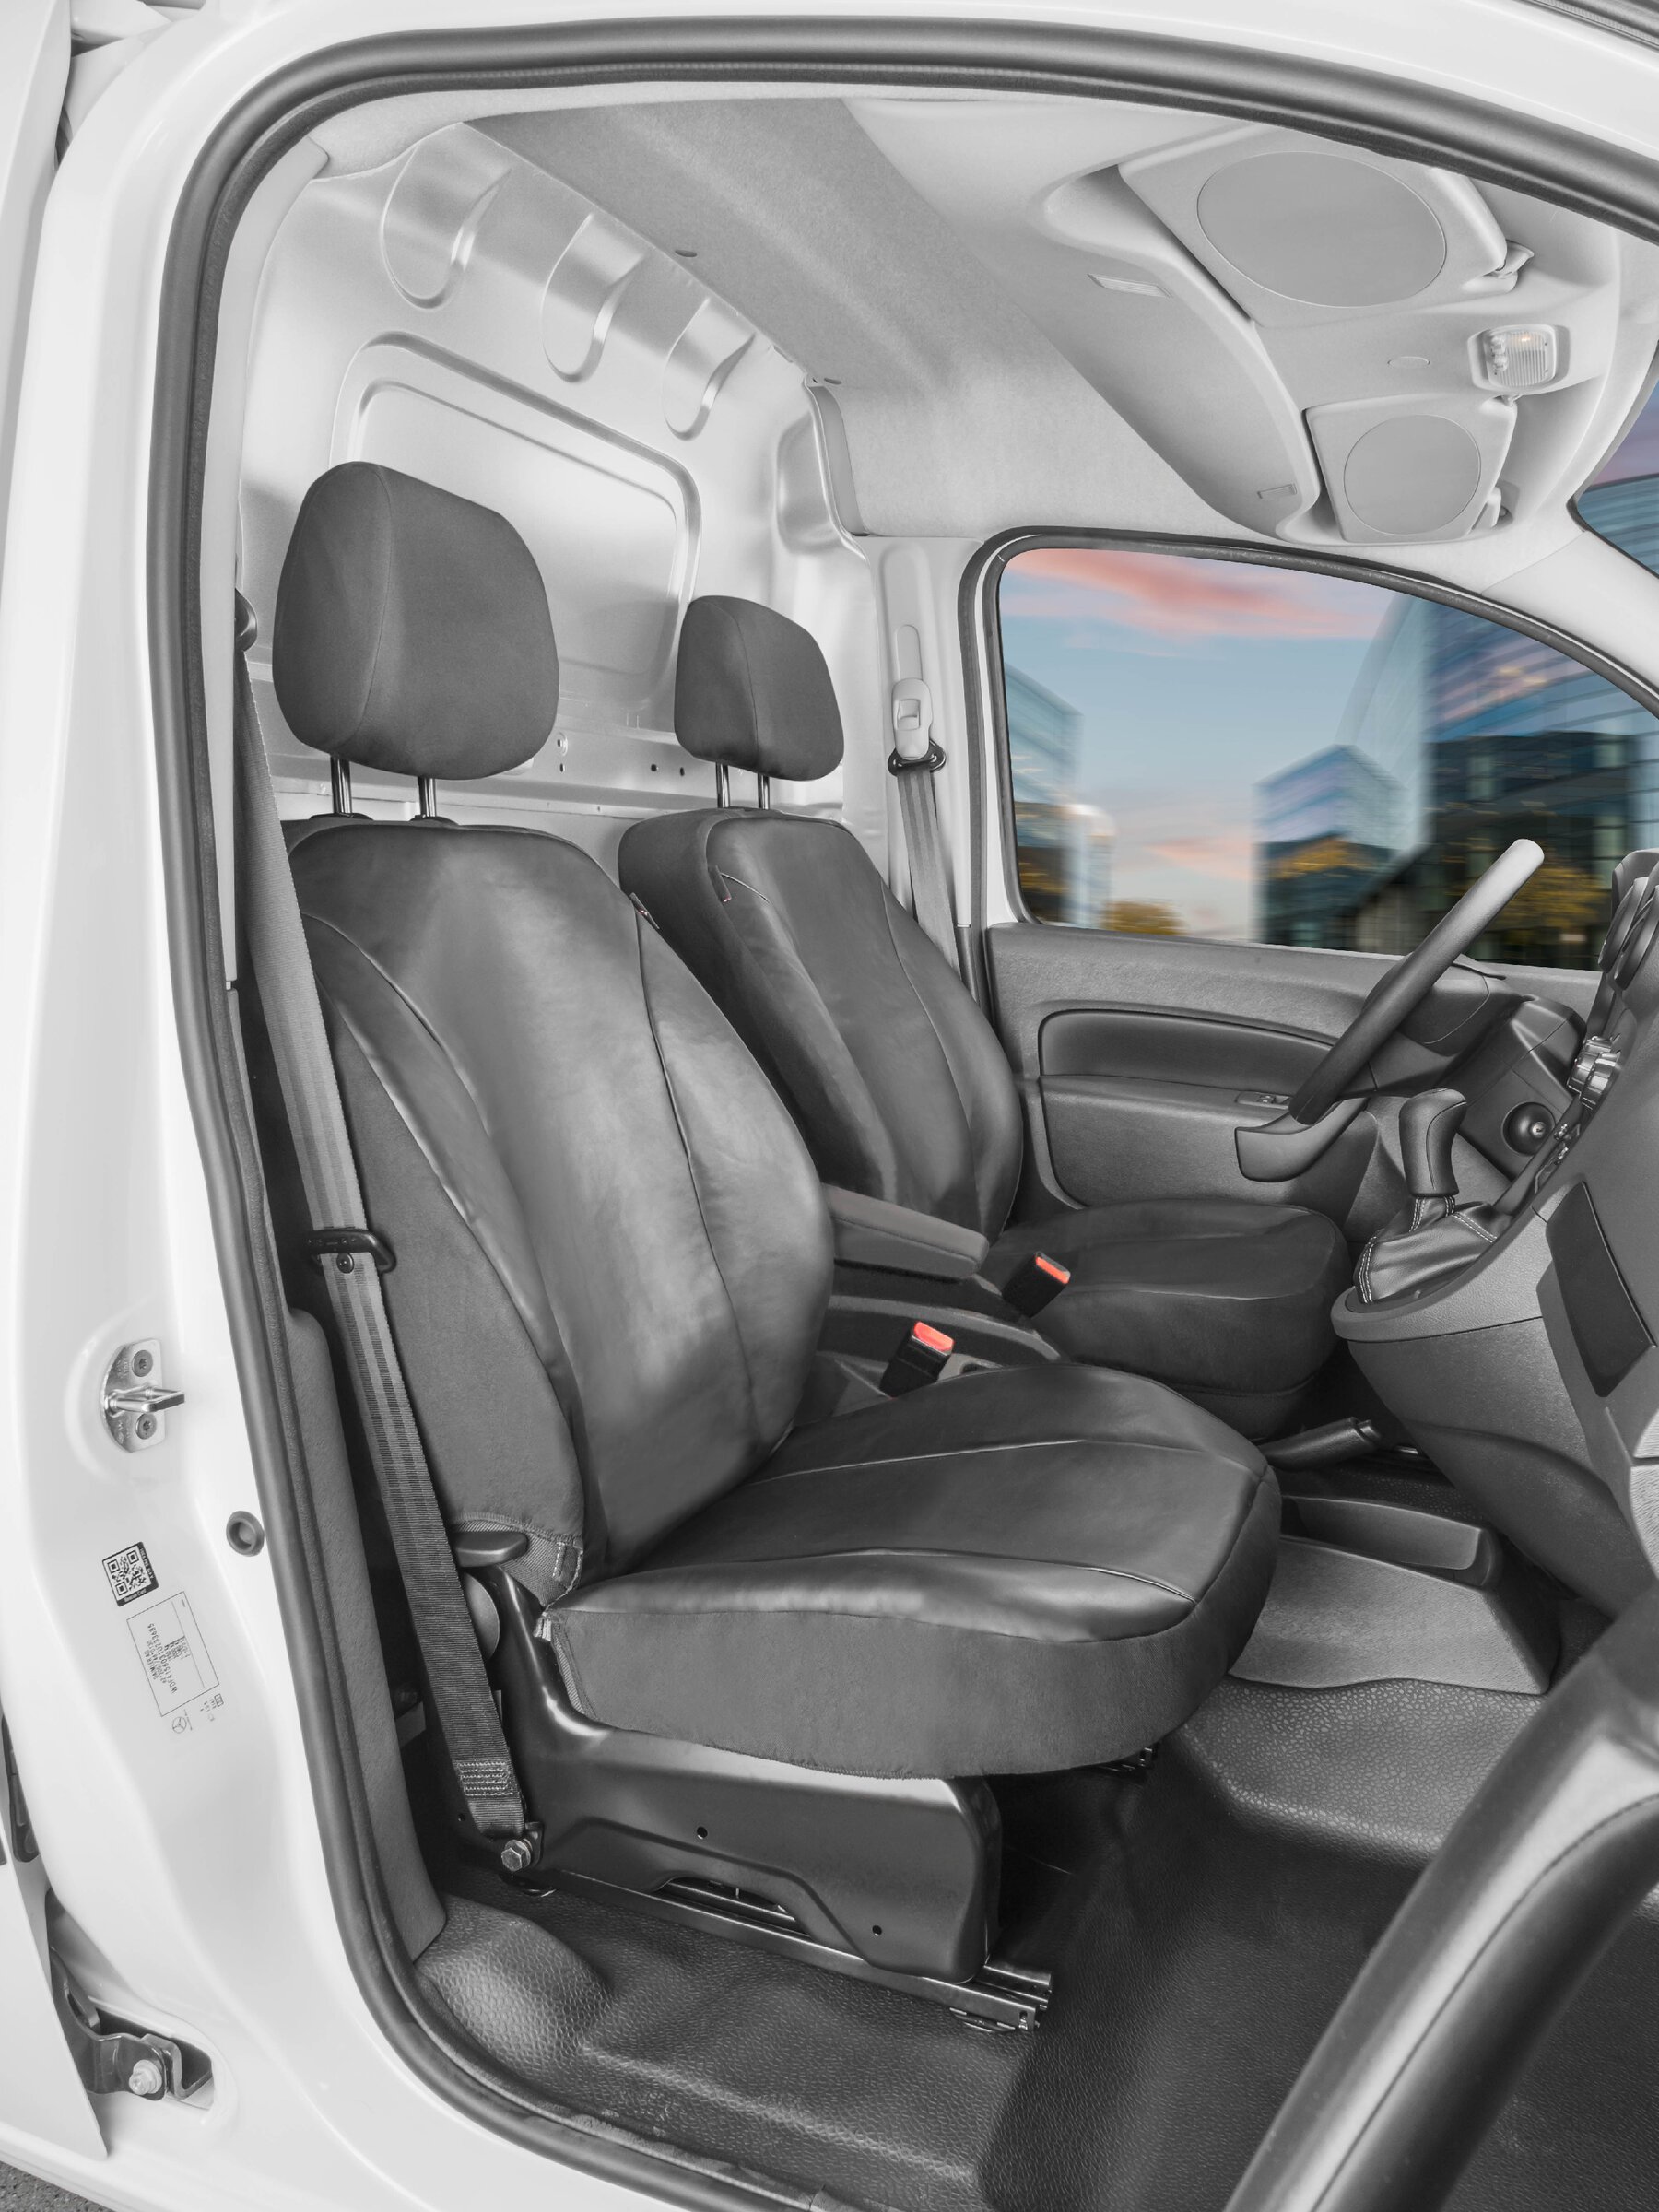 Seat cover made of imitation leather for Ford Transit Courier, 2 single seat covers front